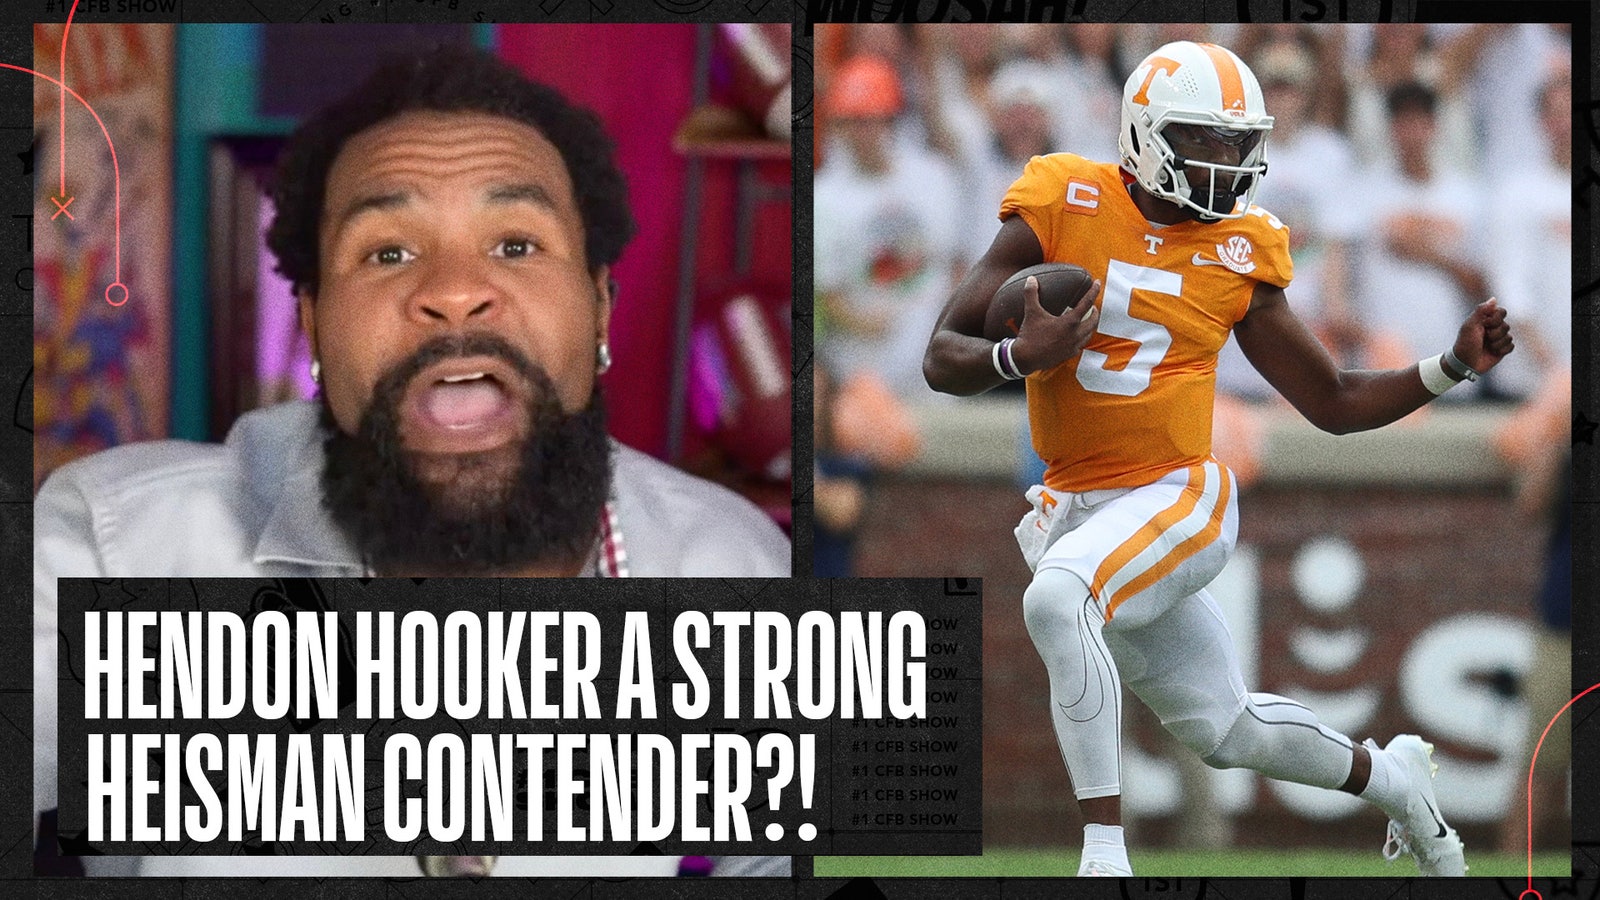 Is Hendon Hooker a competitor to Heisman?